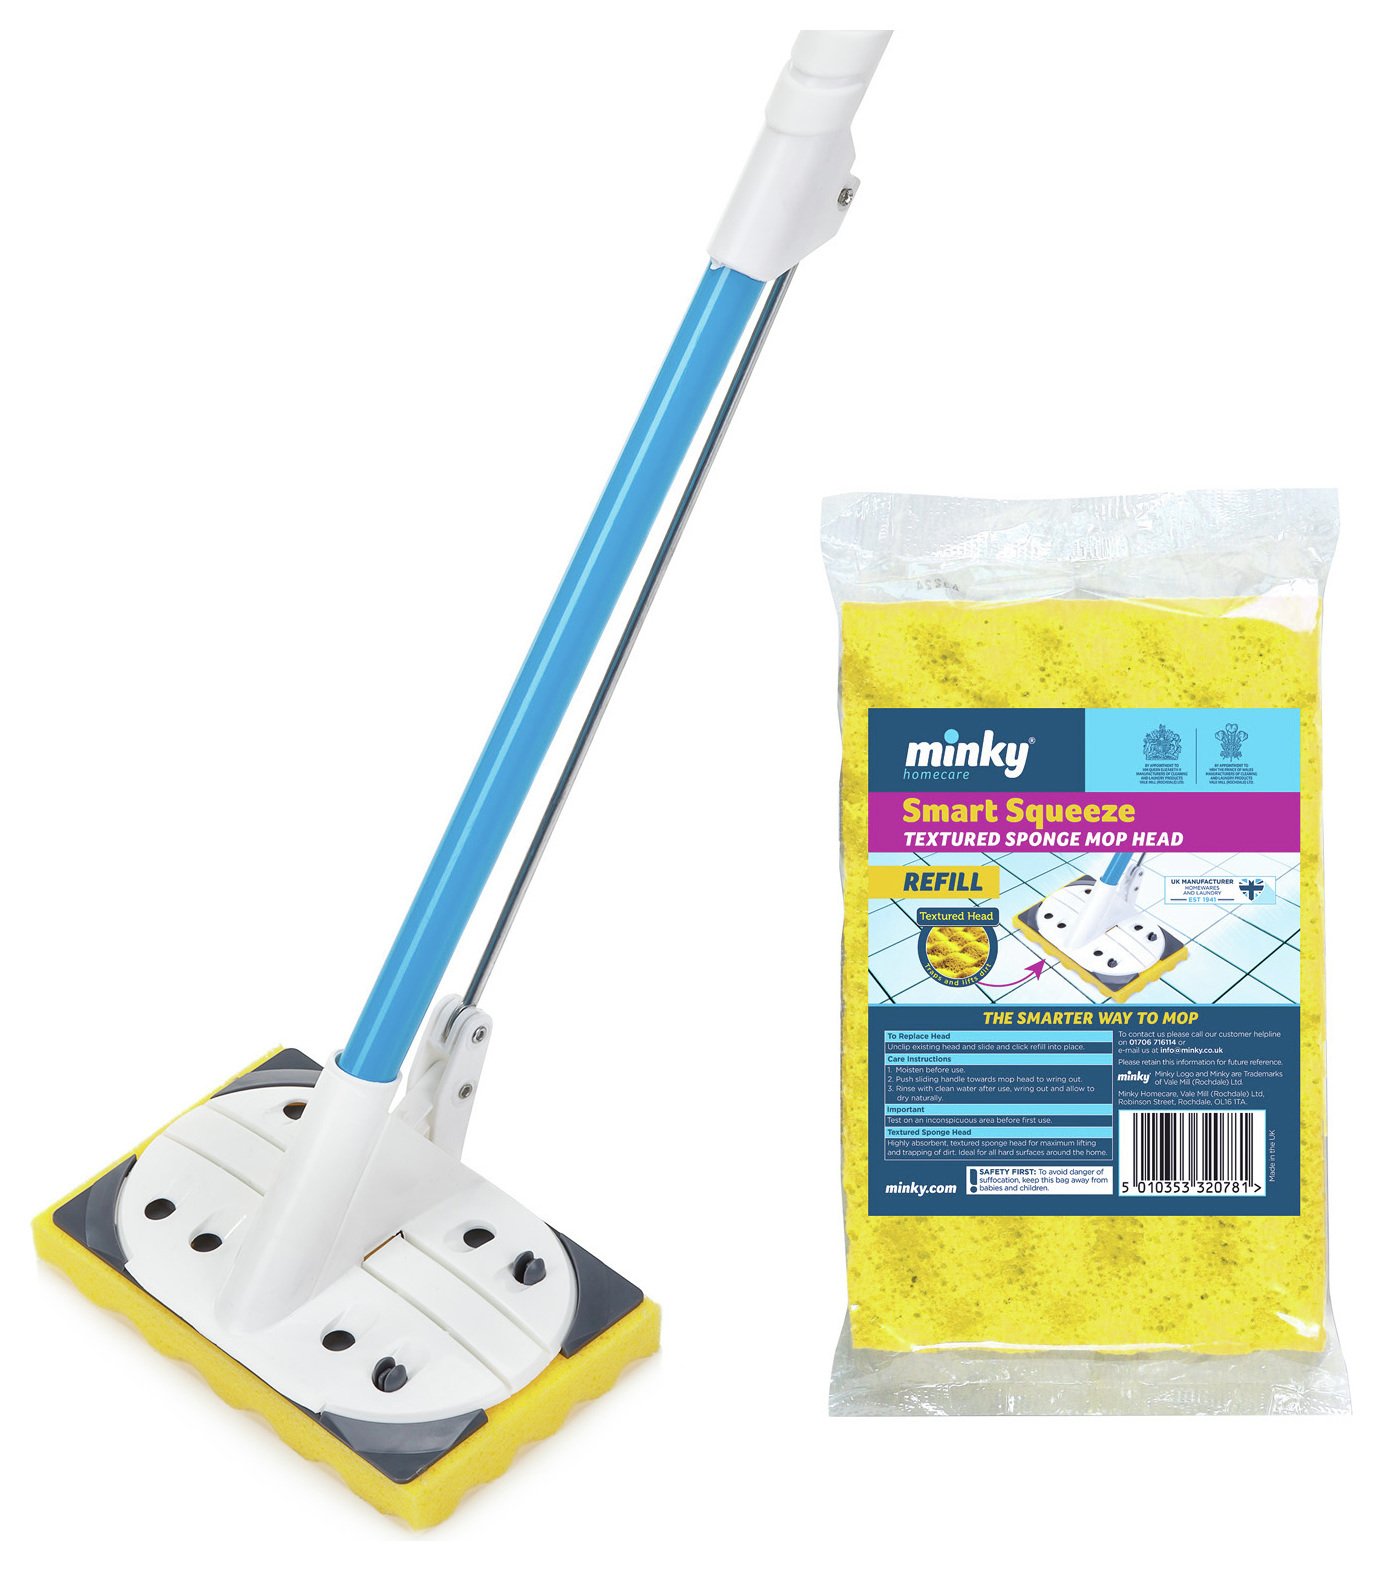 Minky Smart Squeeze Mop and Replacement Head. review